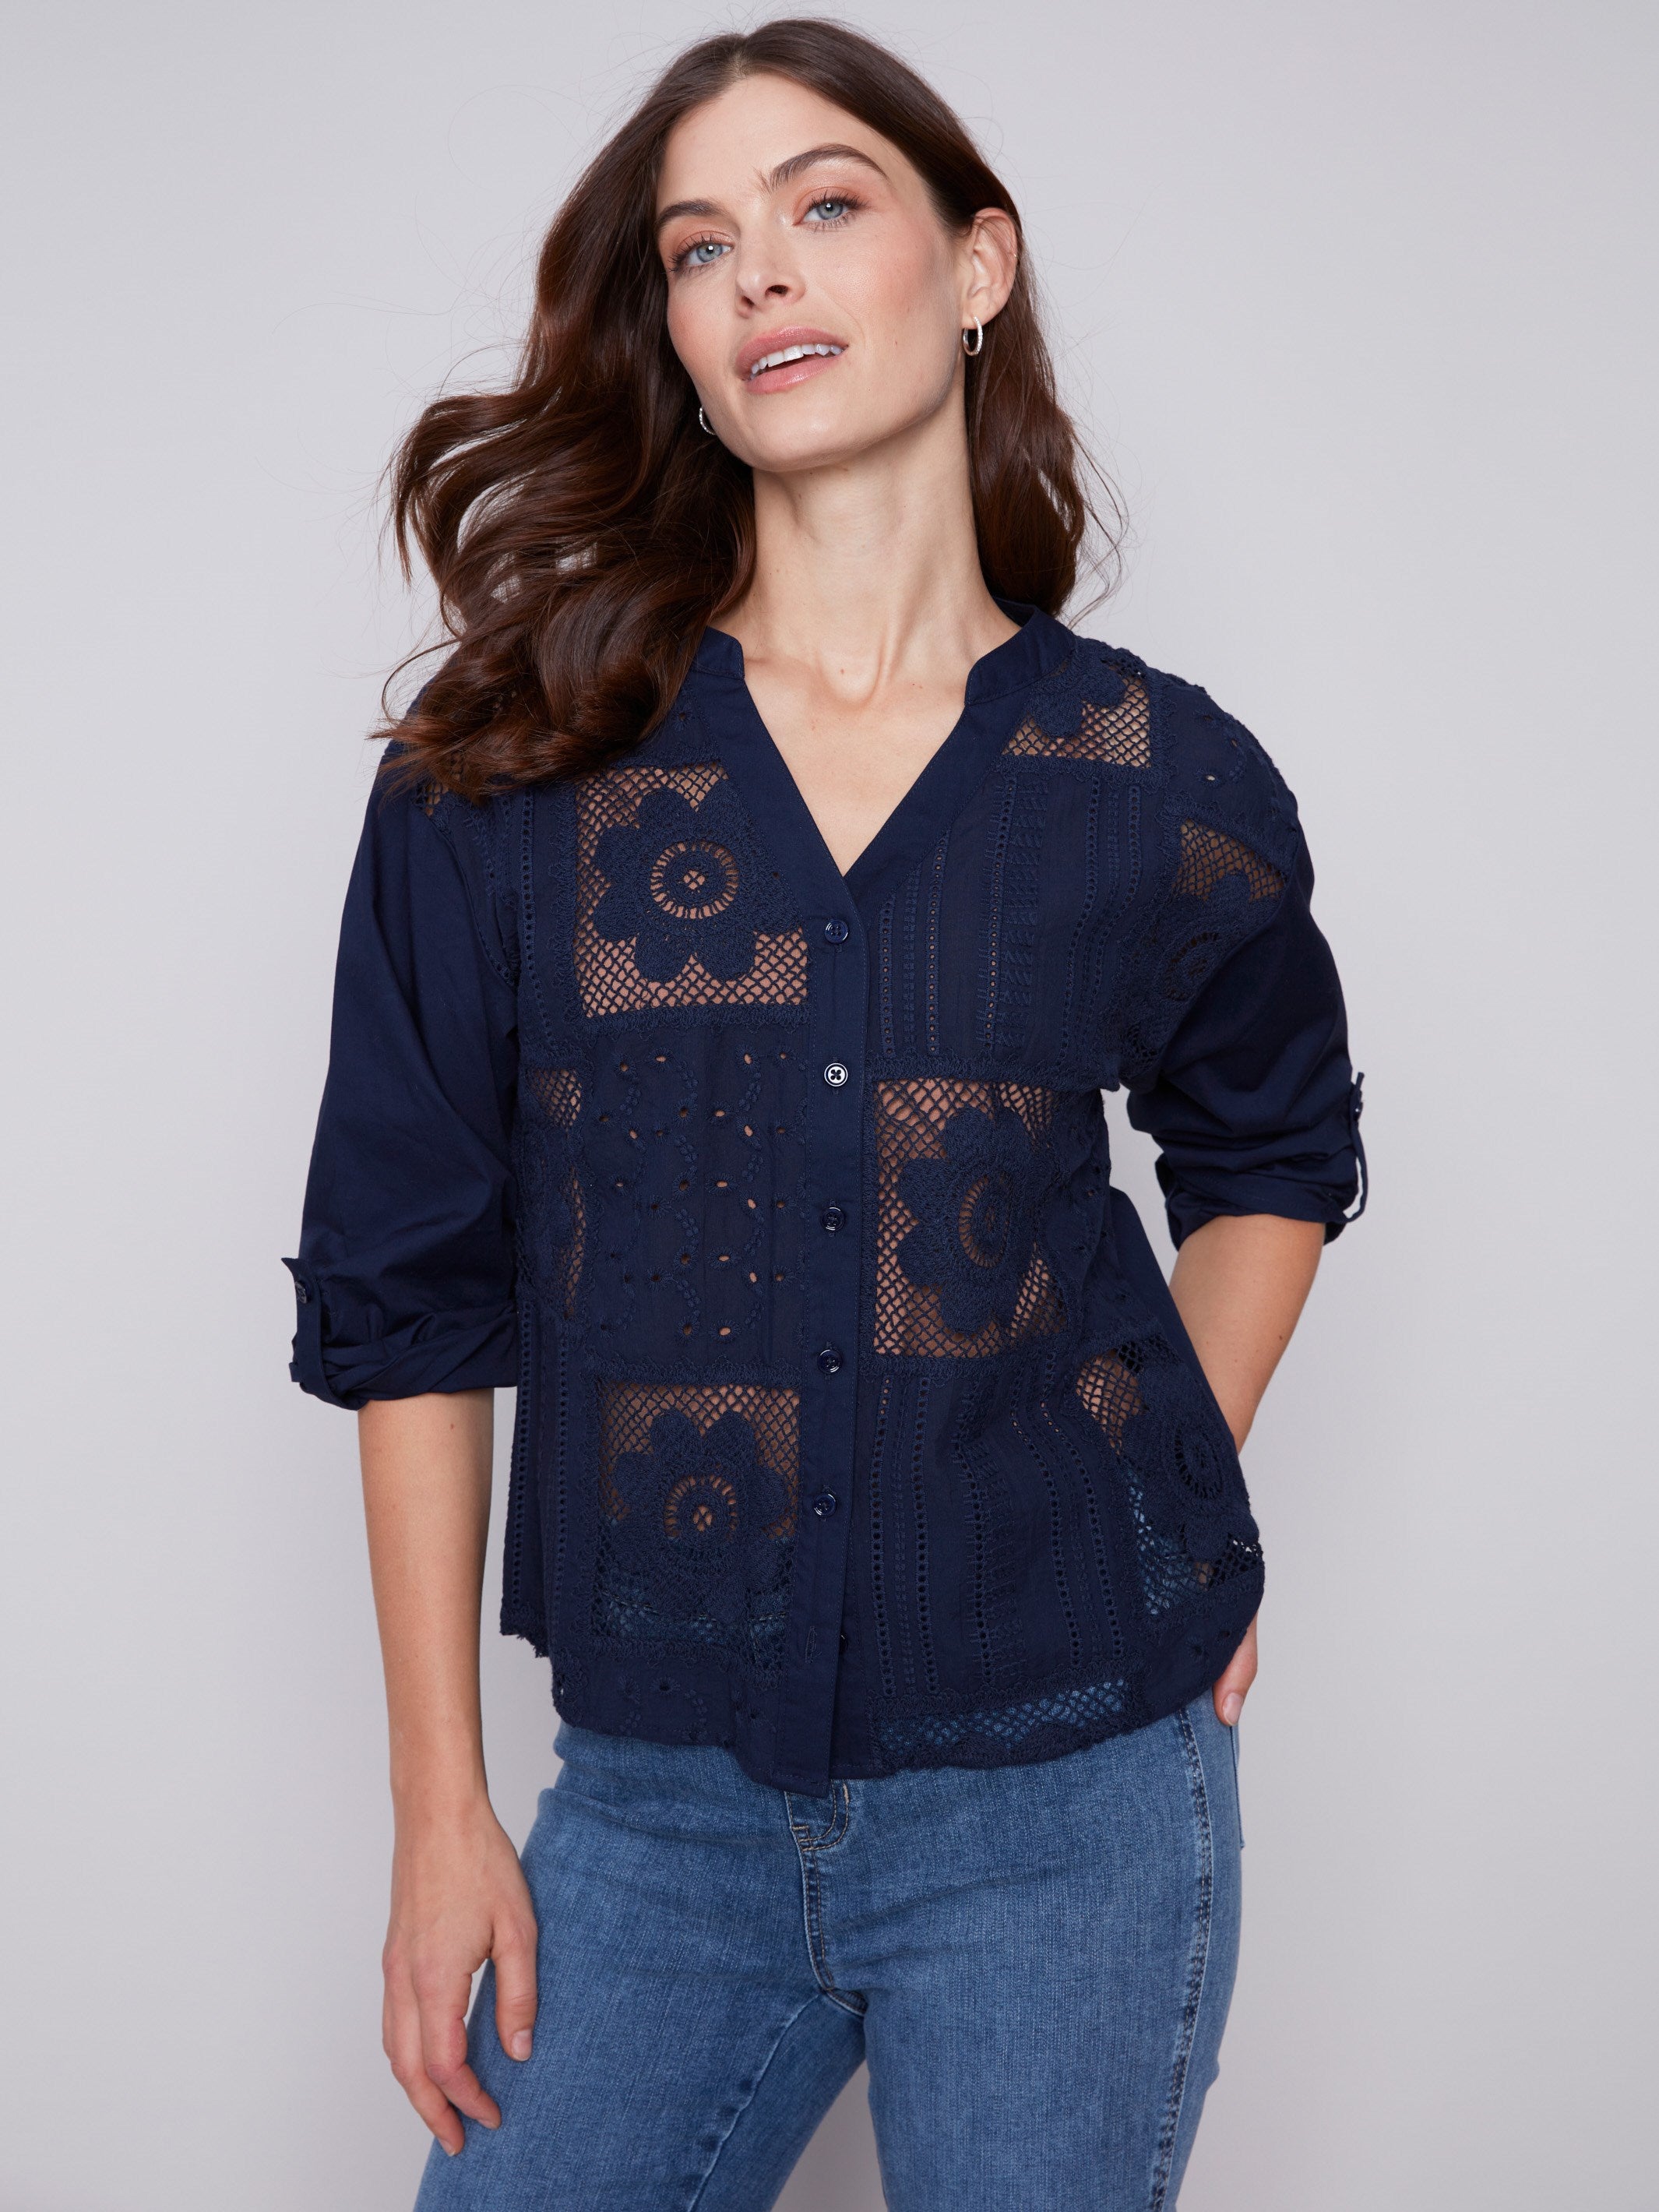 Cotton Eyelet Shirt - Navy - Charlie B Collection Canada - Image 4